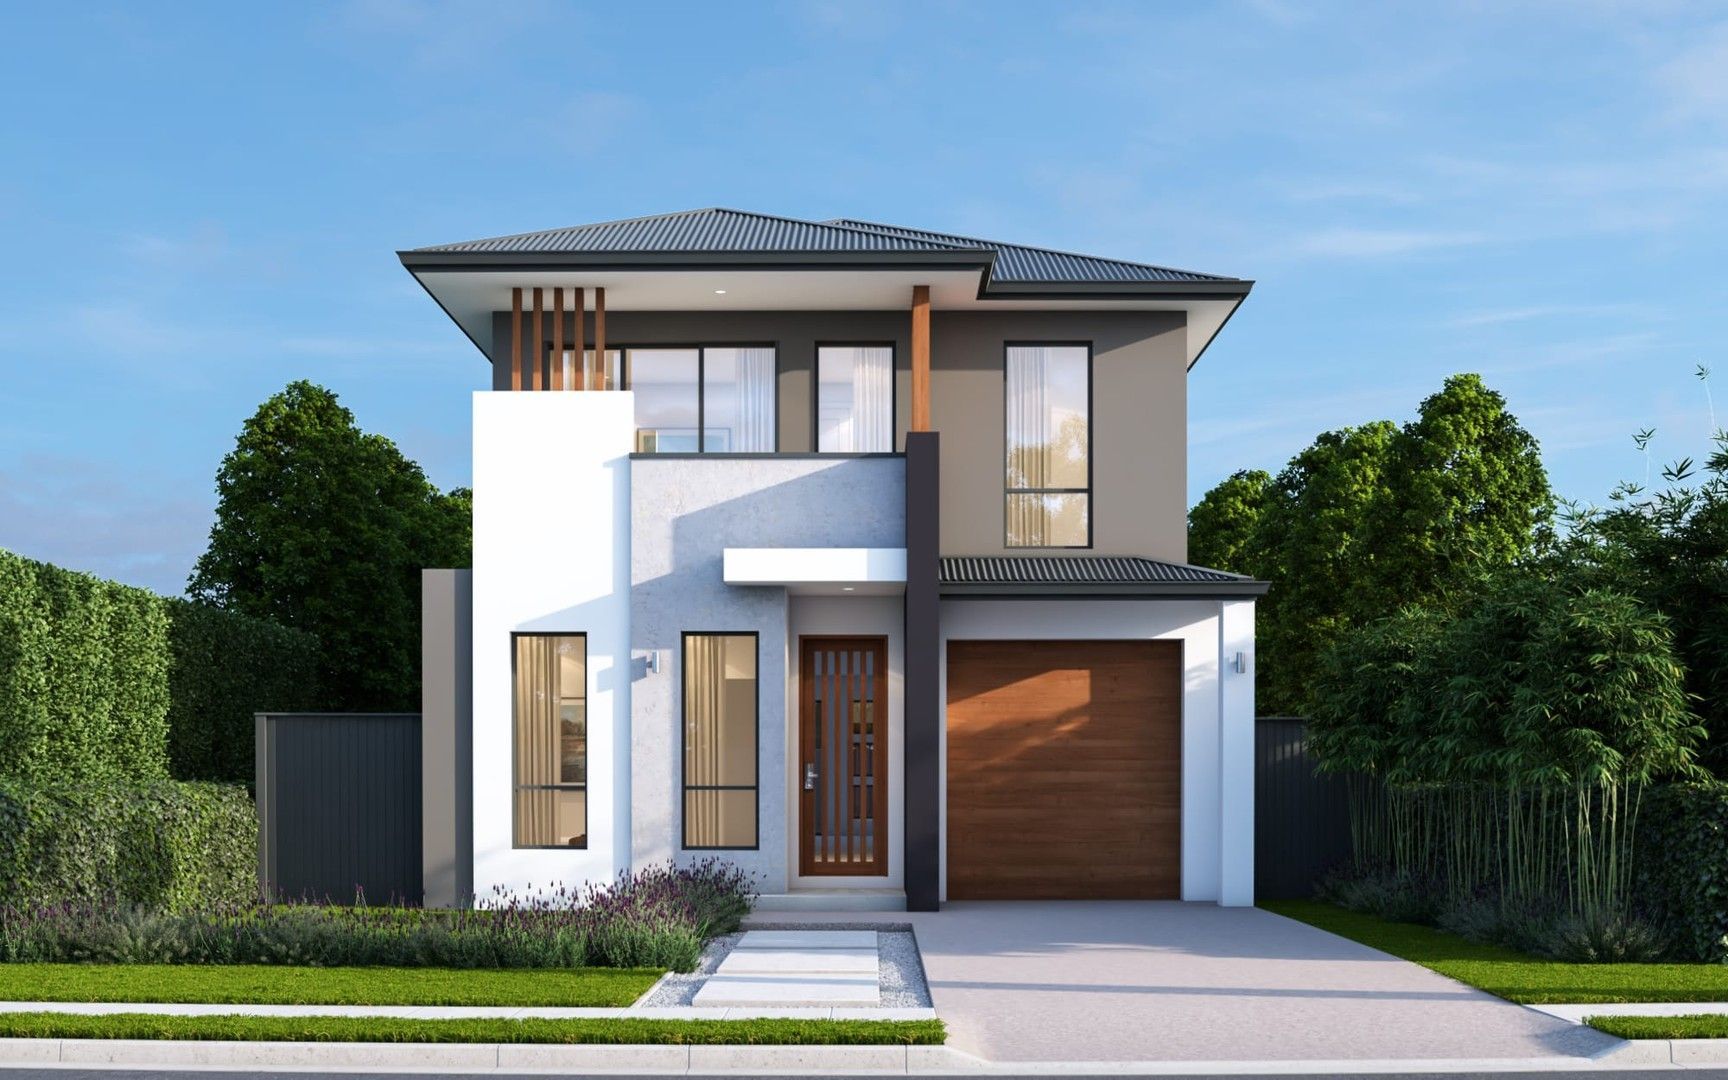 5 bedrooms New House & Land in CALL US TO BOOK YOUR INSPECTION THE PONDS NSW, 2769